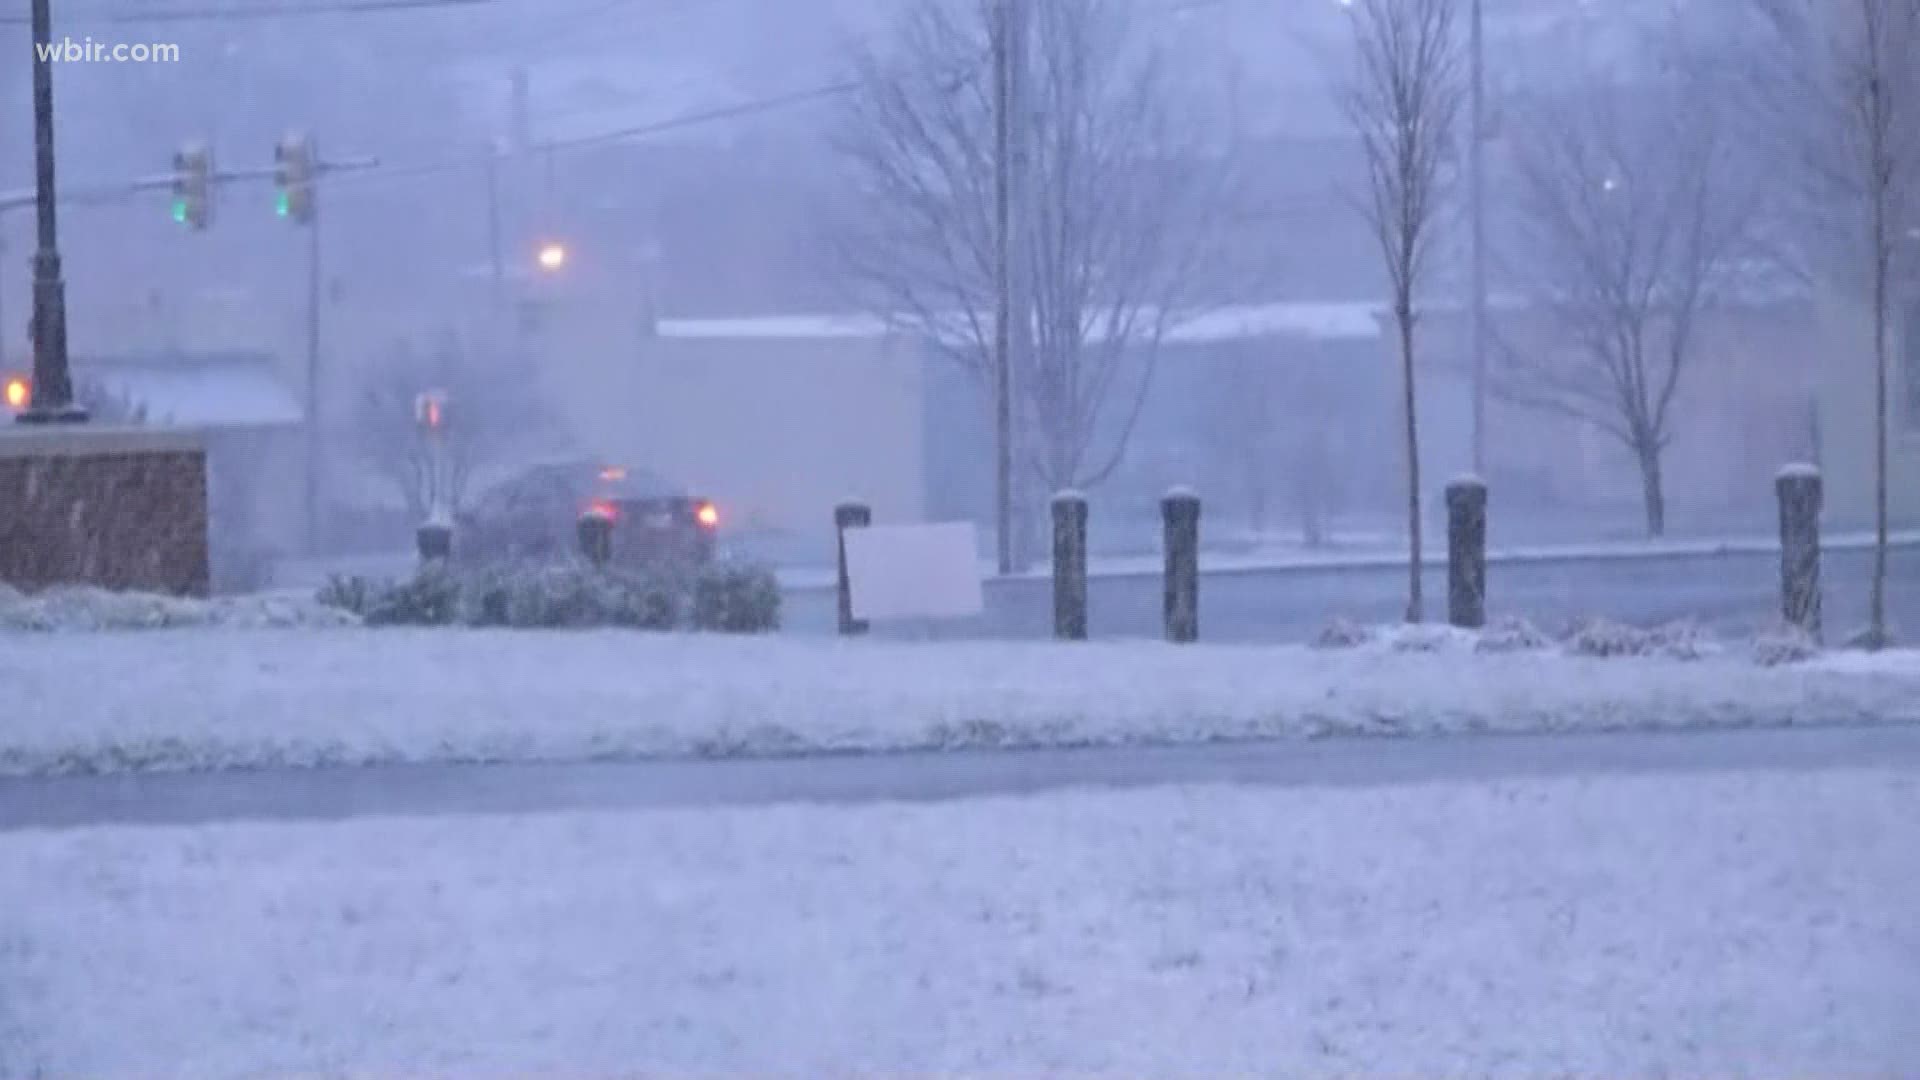 Morristown also saw snowfall Thursday afternoon.